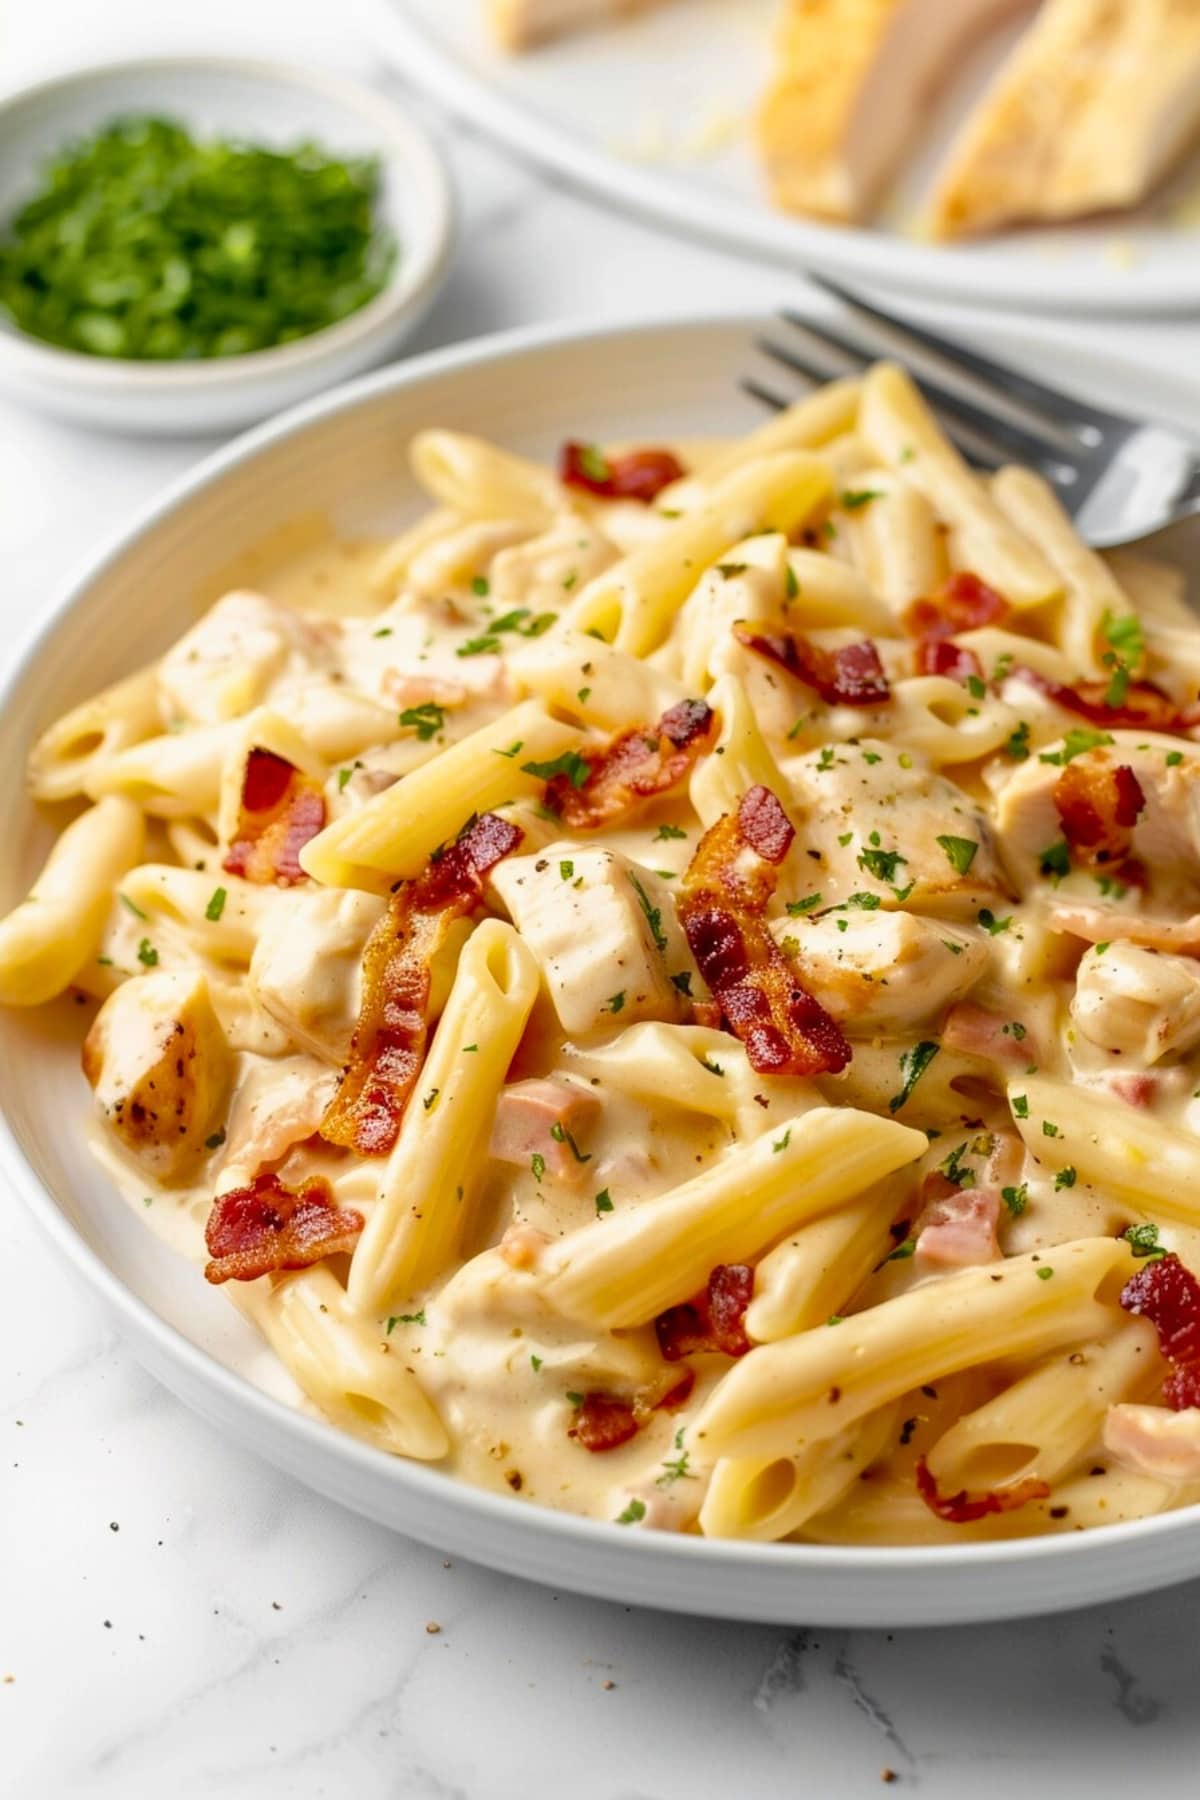 Creamy crack chicken penne pasta served in a white plate.